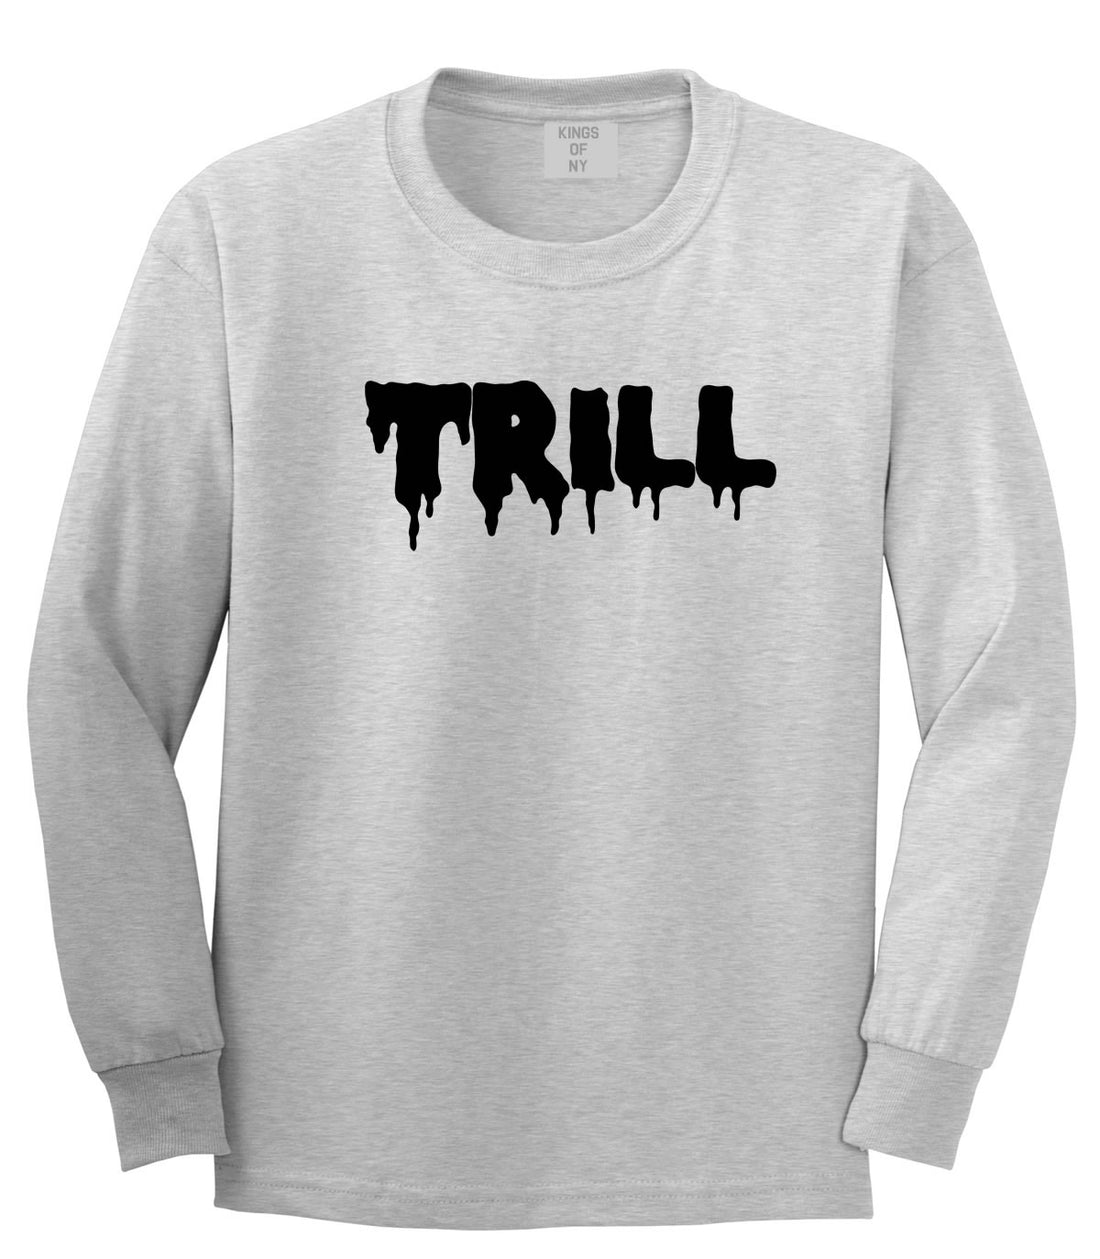 Trill Blood New York Bx Been Style Fashion Long Sleeve T-Shirt In Grey by Kings Of NY